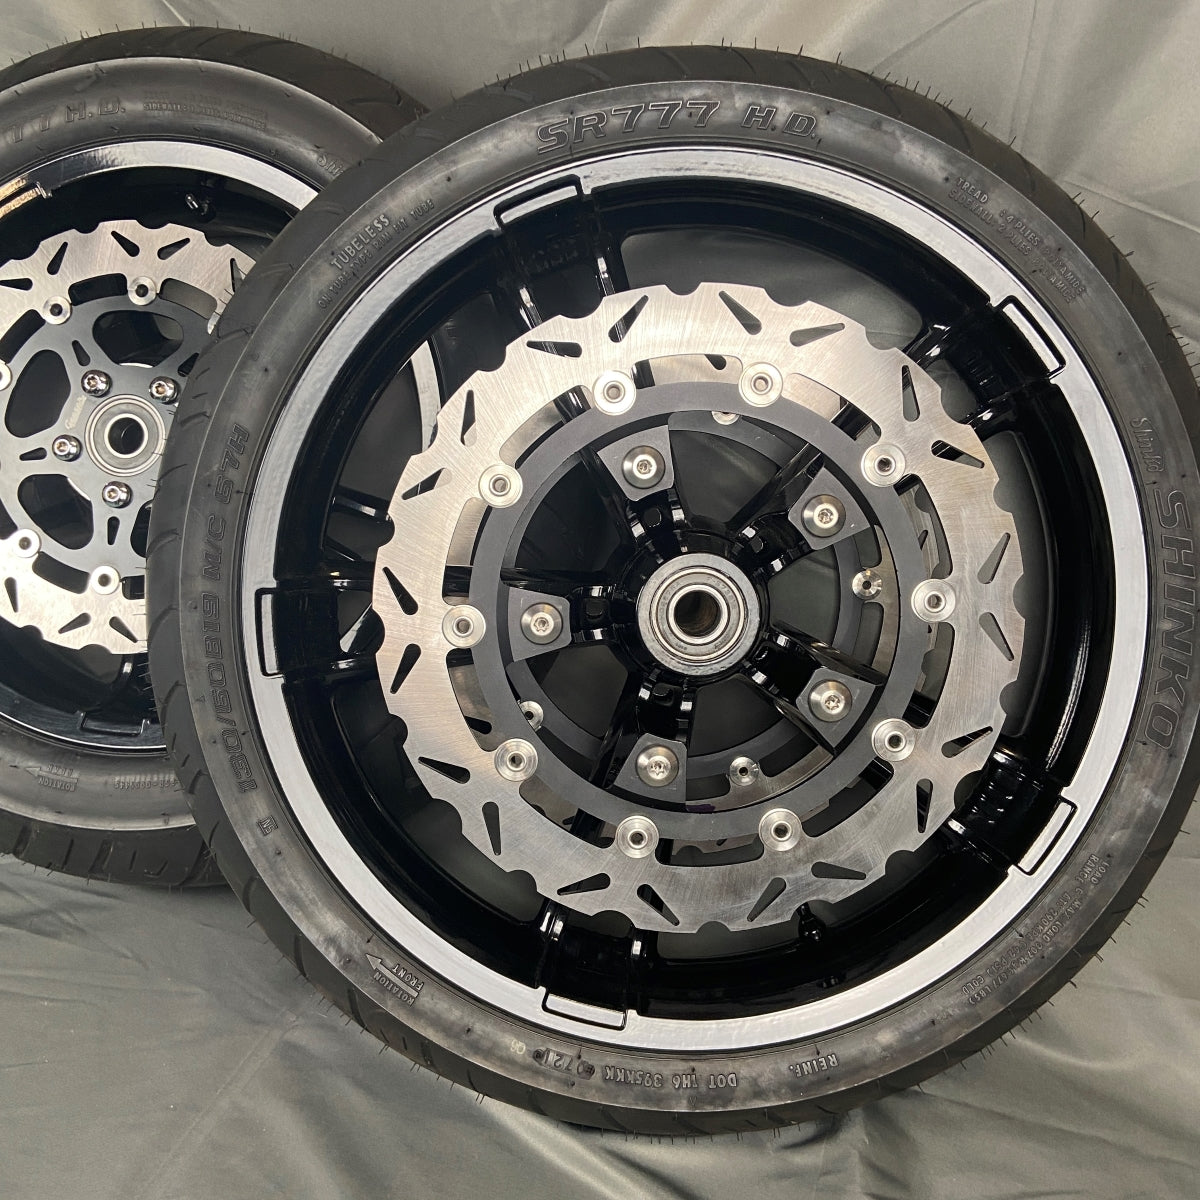 14-inch Floating Brake Rotor for 'Enforcer' style front wheels; inverted forks with RADIAL calipers only